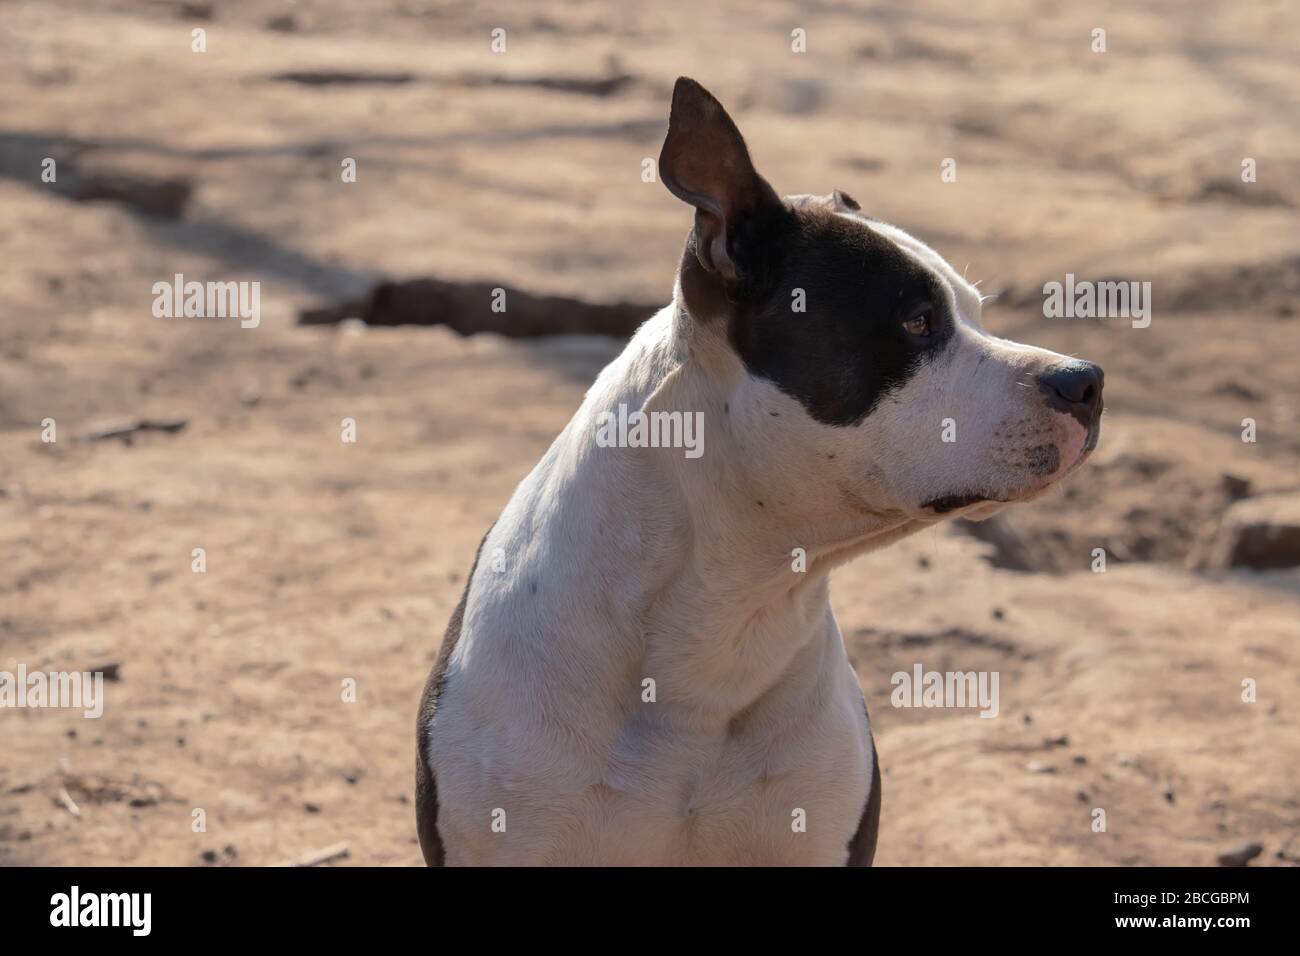 Black and white american staffordshire terrier. Amstaff dog with desert background. Black and white pet. Stock Photo